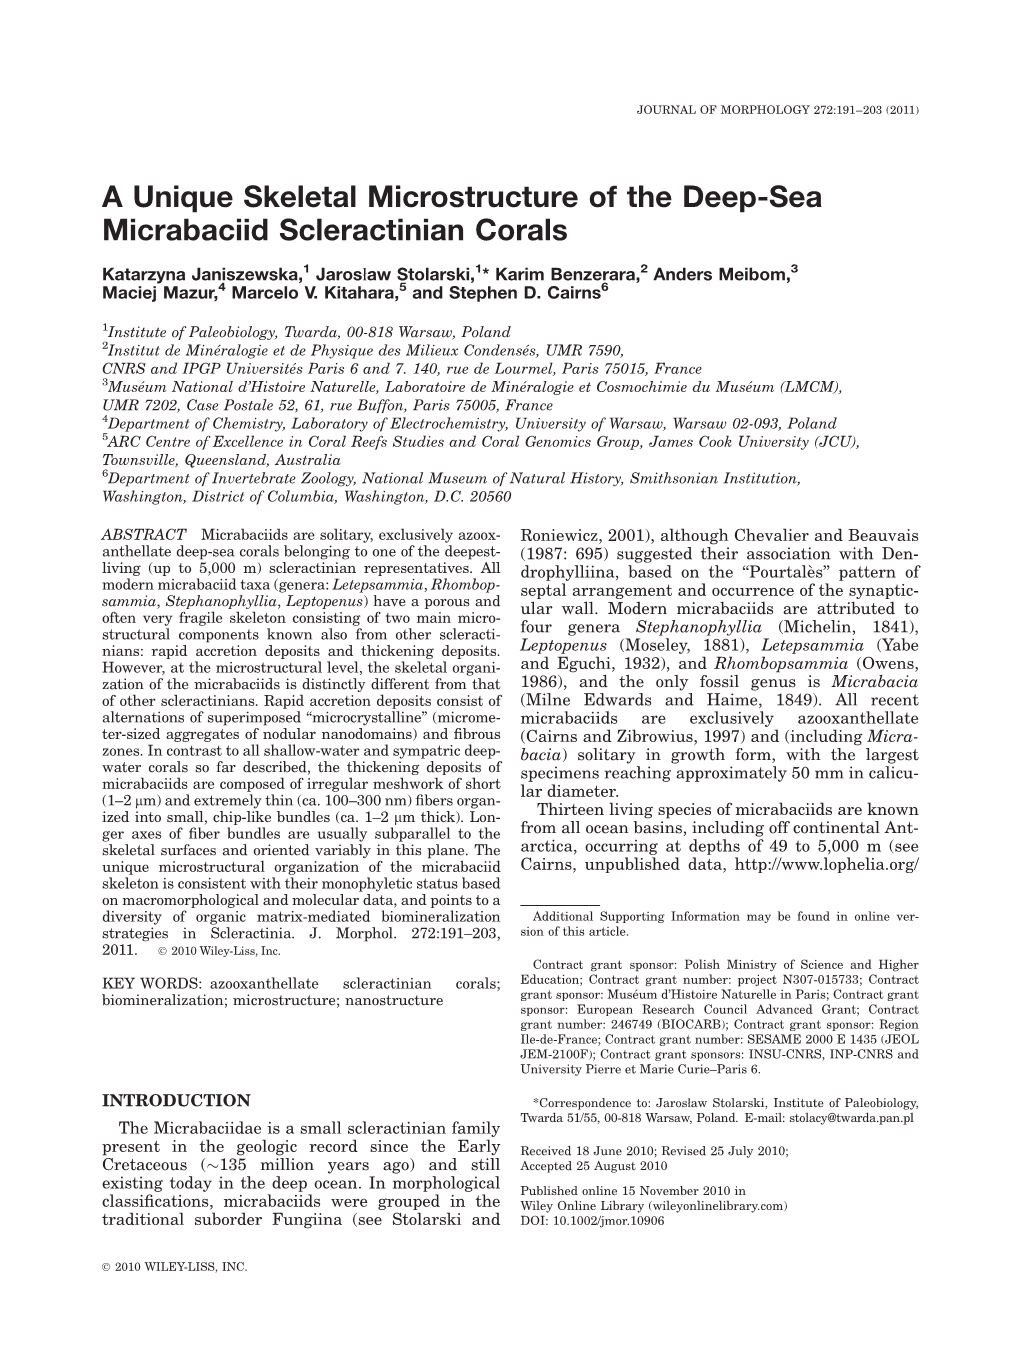 A Unique Skeletal Microstructure of the Deepsea Micrabaciid Scleractinian